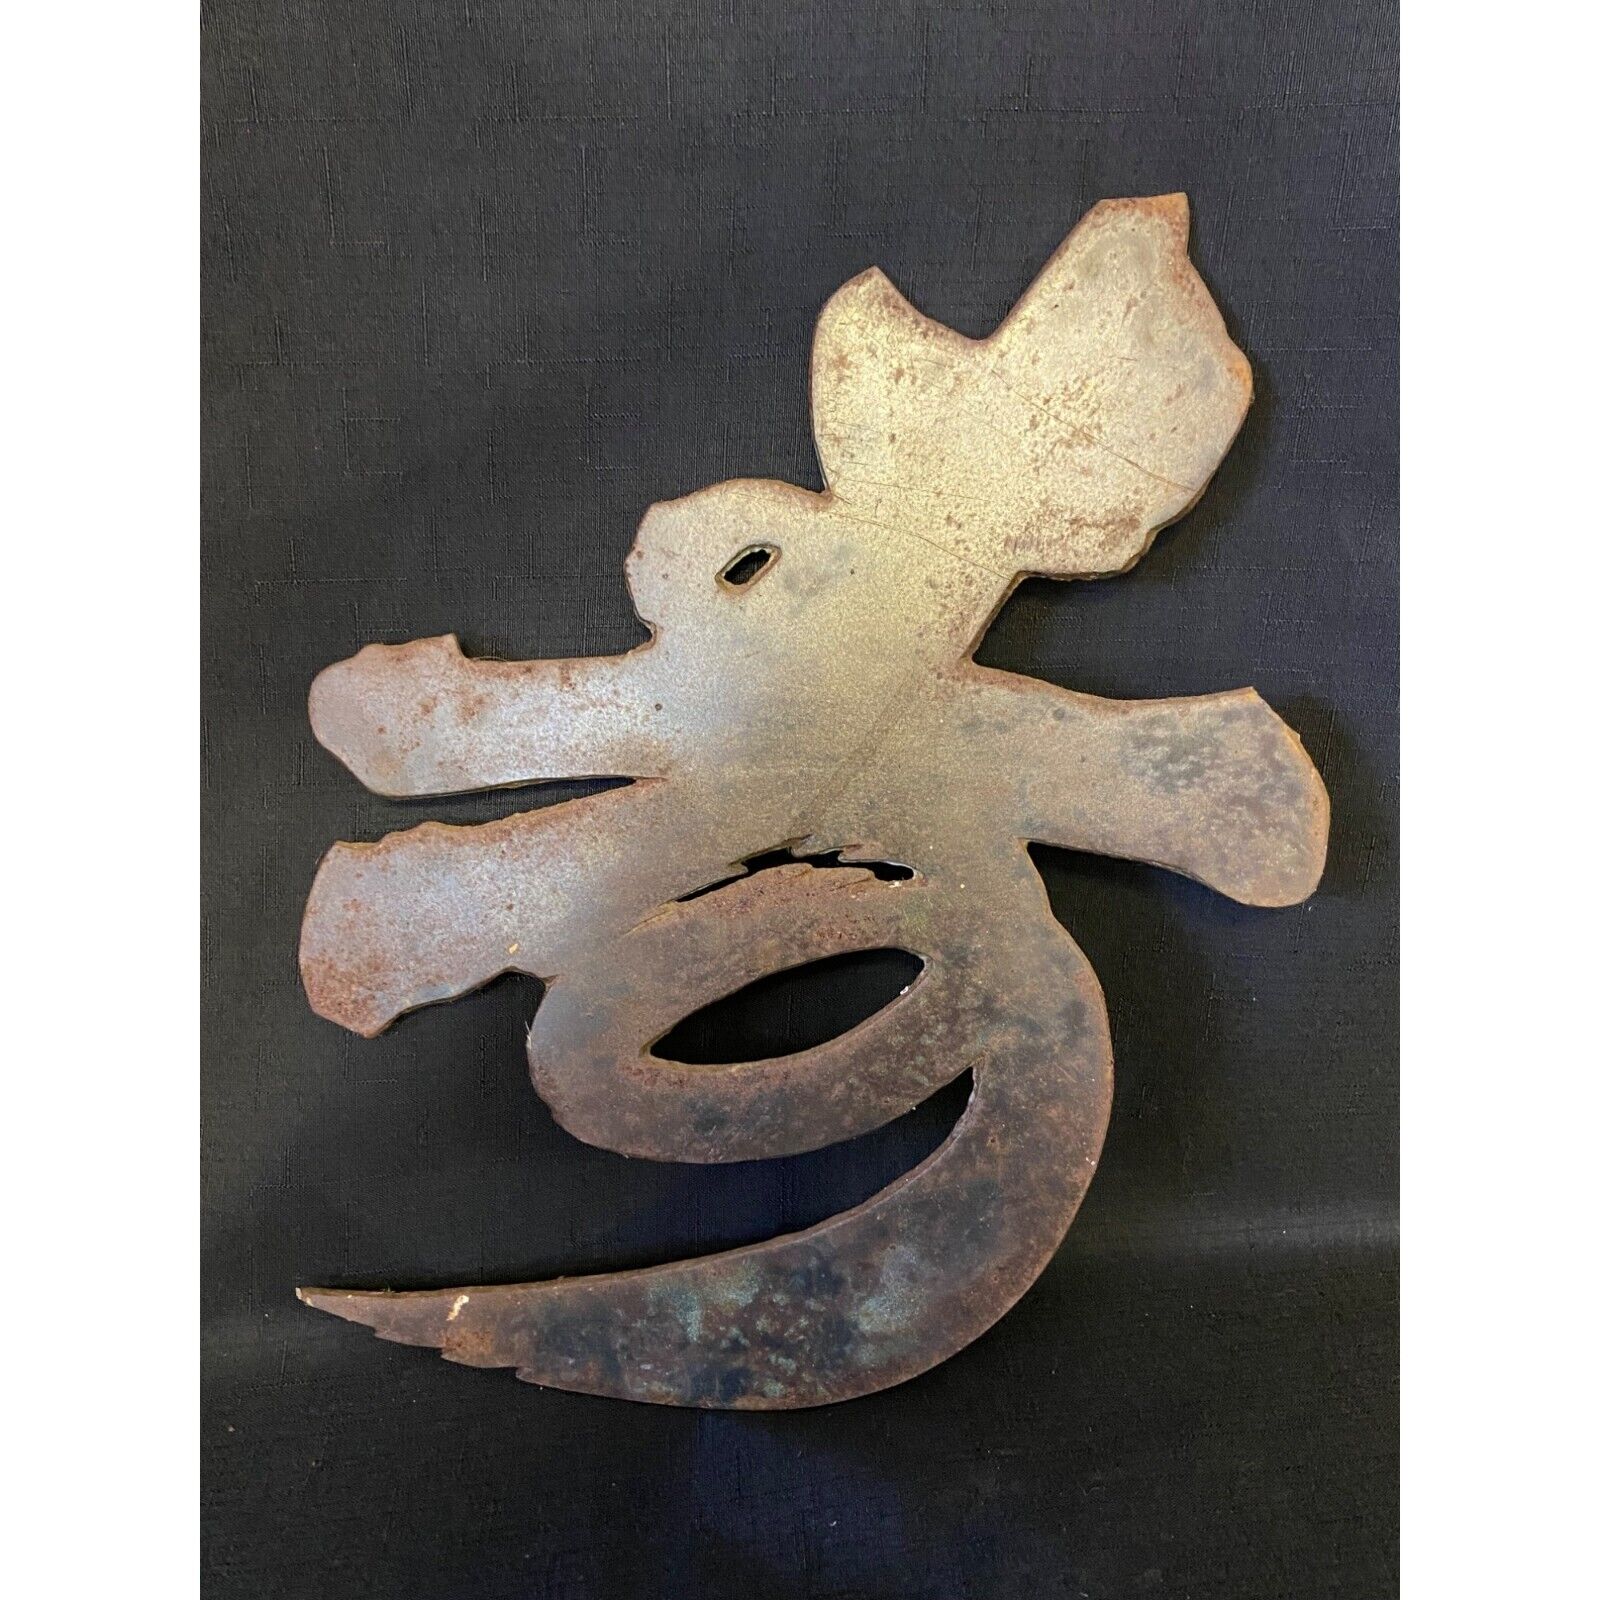 Chinese Symbols Metal Rust Home Wall Decor 11